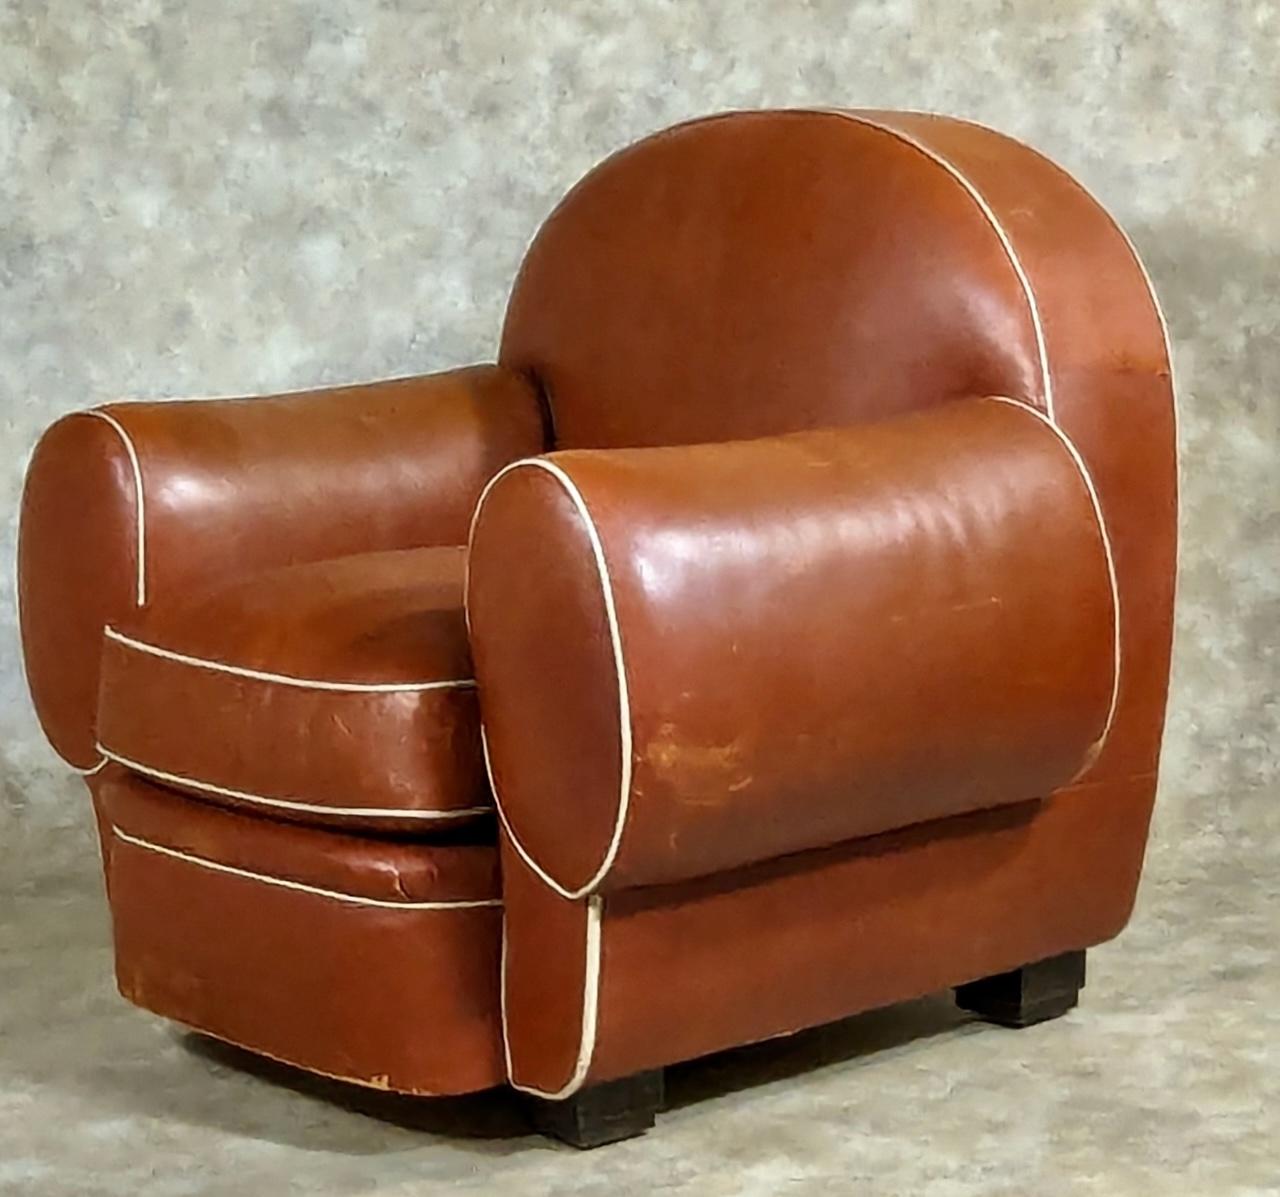 French Art Deco pair of club chairs by Ruhlmann, 1931, in leather with solid macassar ebony feet. One chair branded Designee Par Ruhlmann. 41” wide x  34” deep x 36” high. This model was presented at the  Paris Colonial Exposition in 1931. 

The